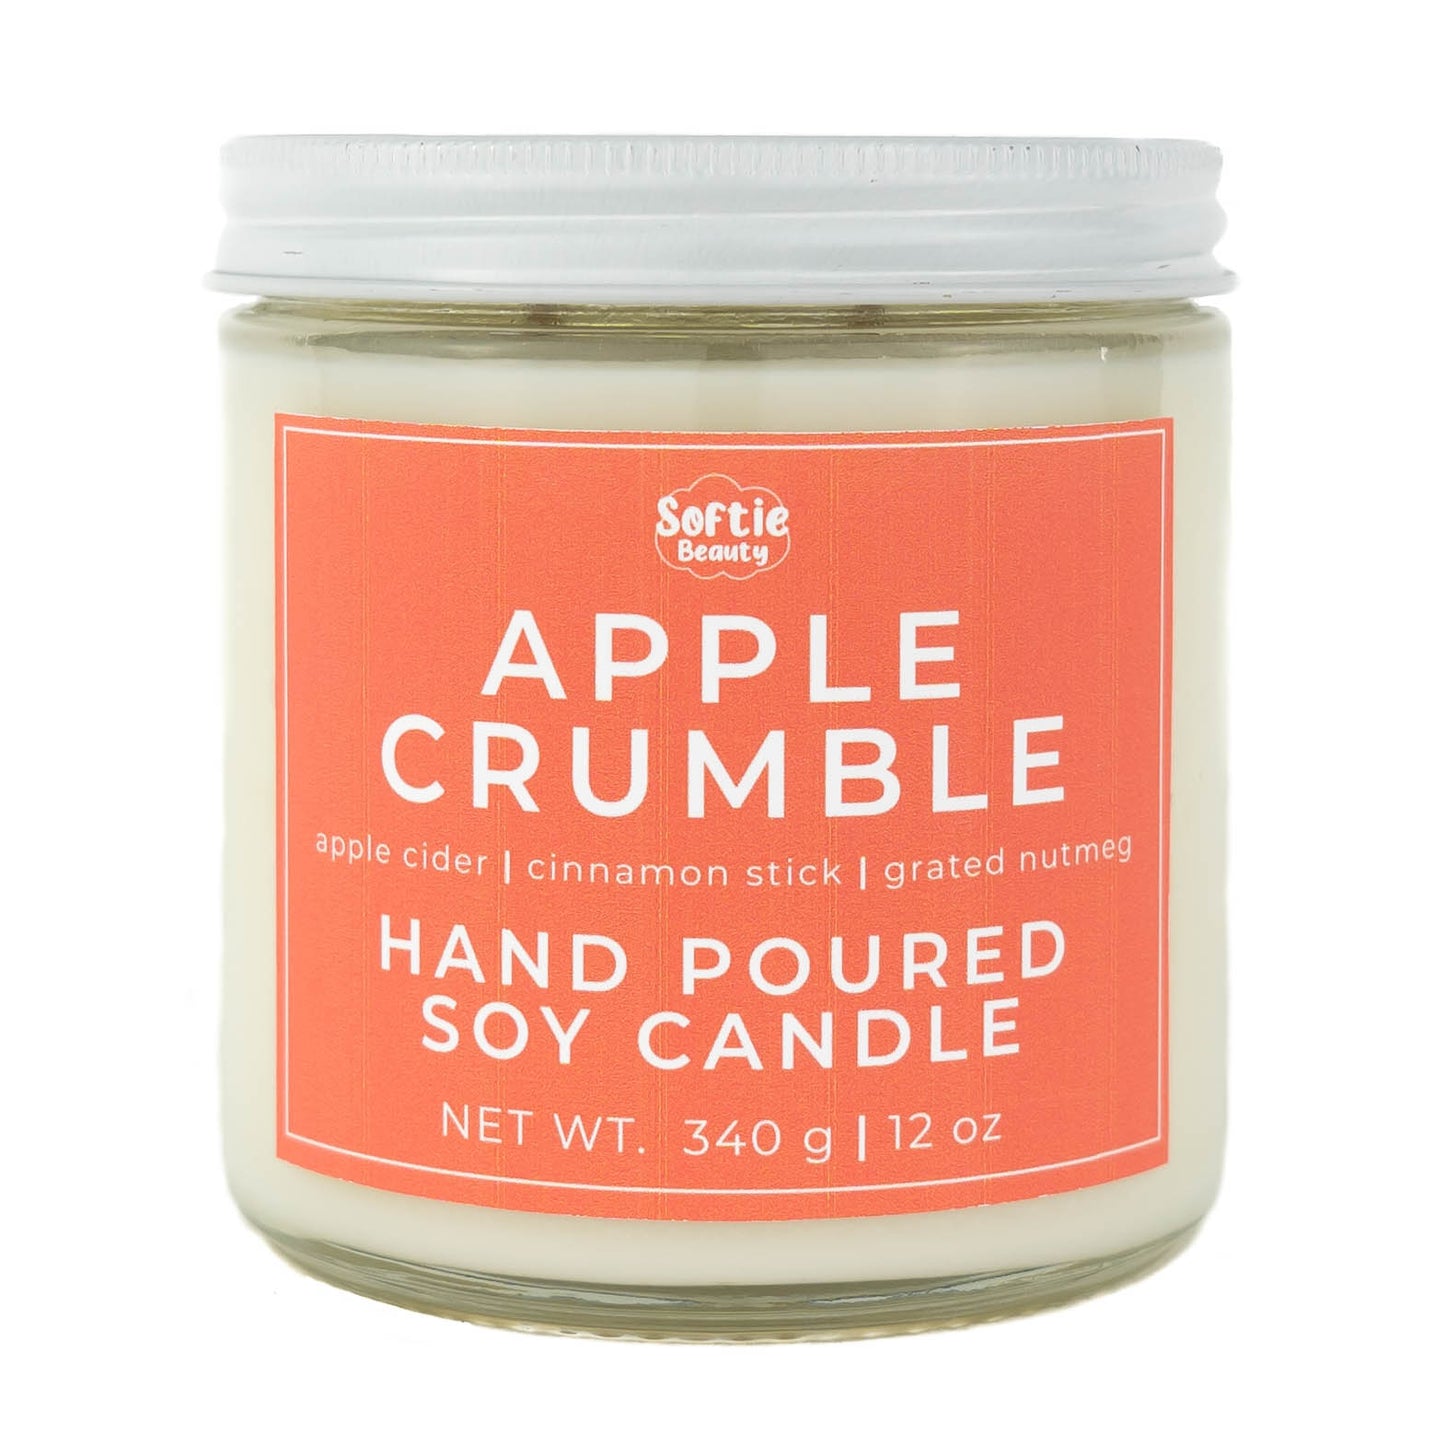 Apple Crumble 12oz Soy Candle